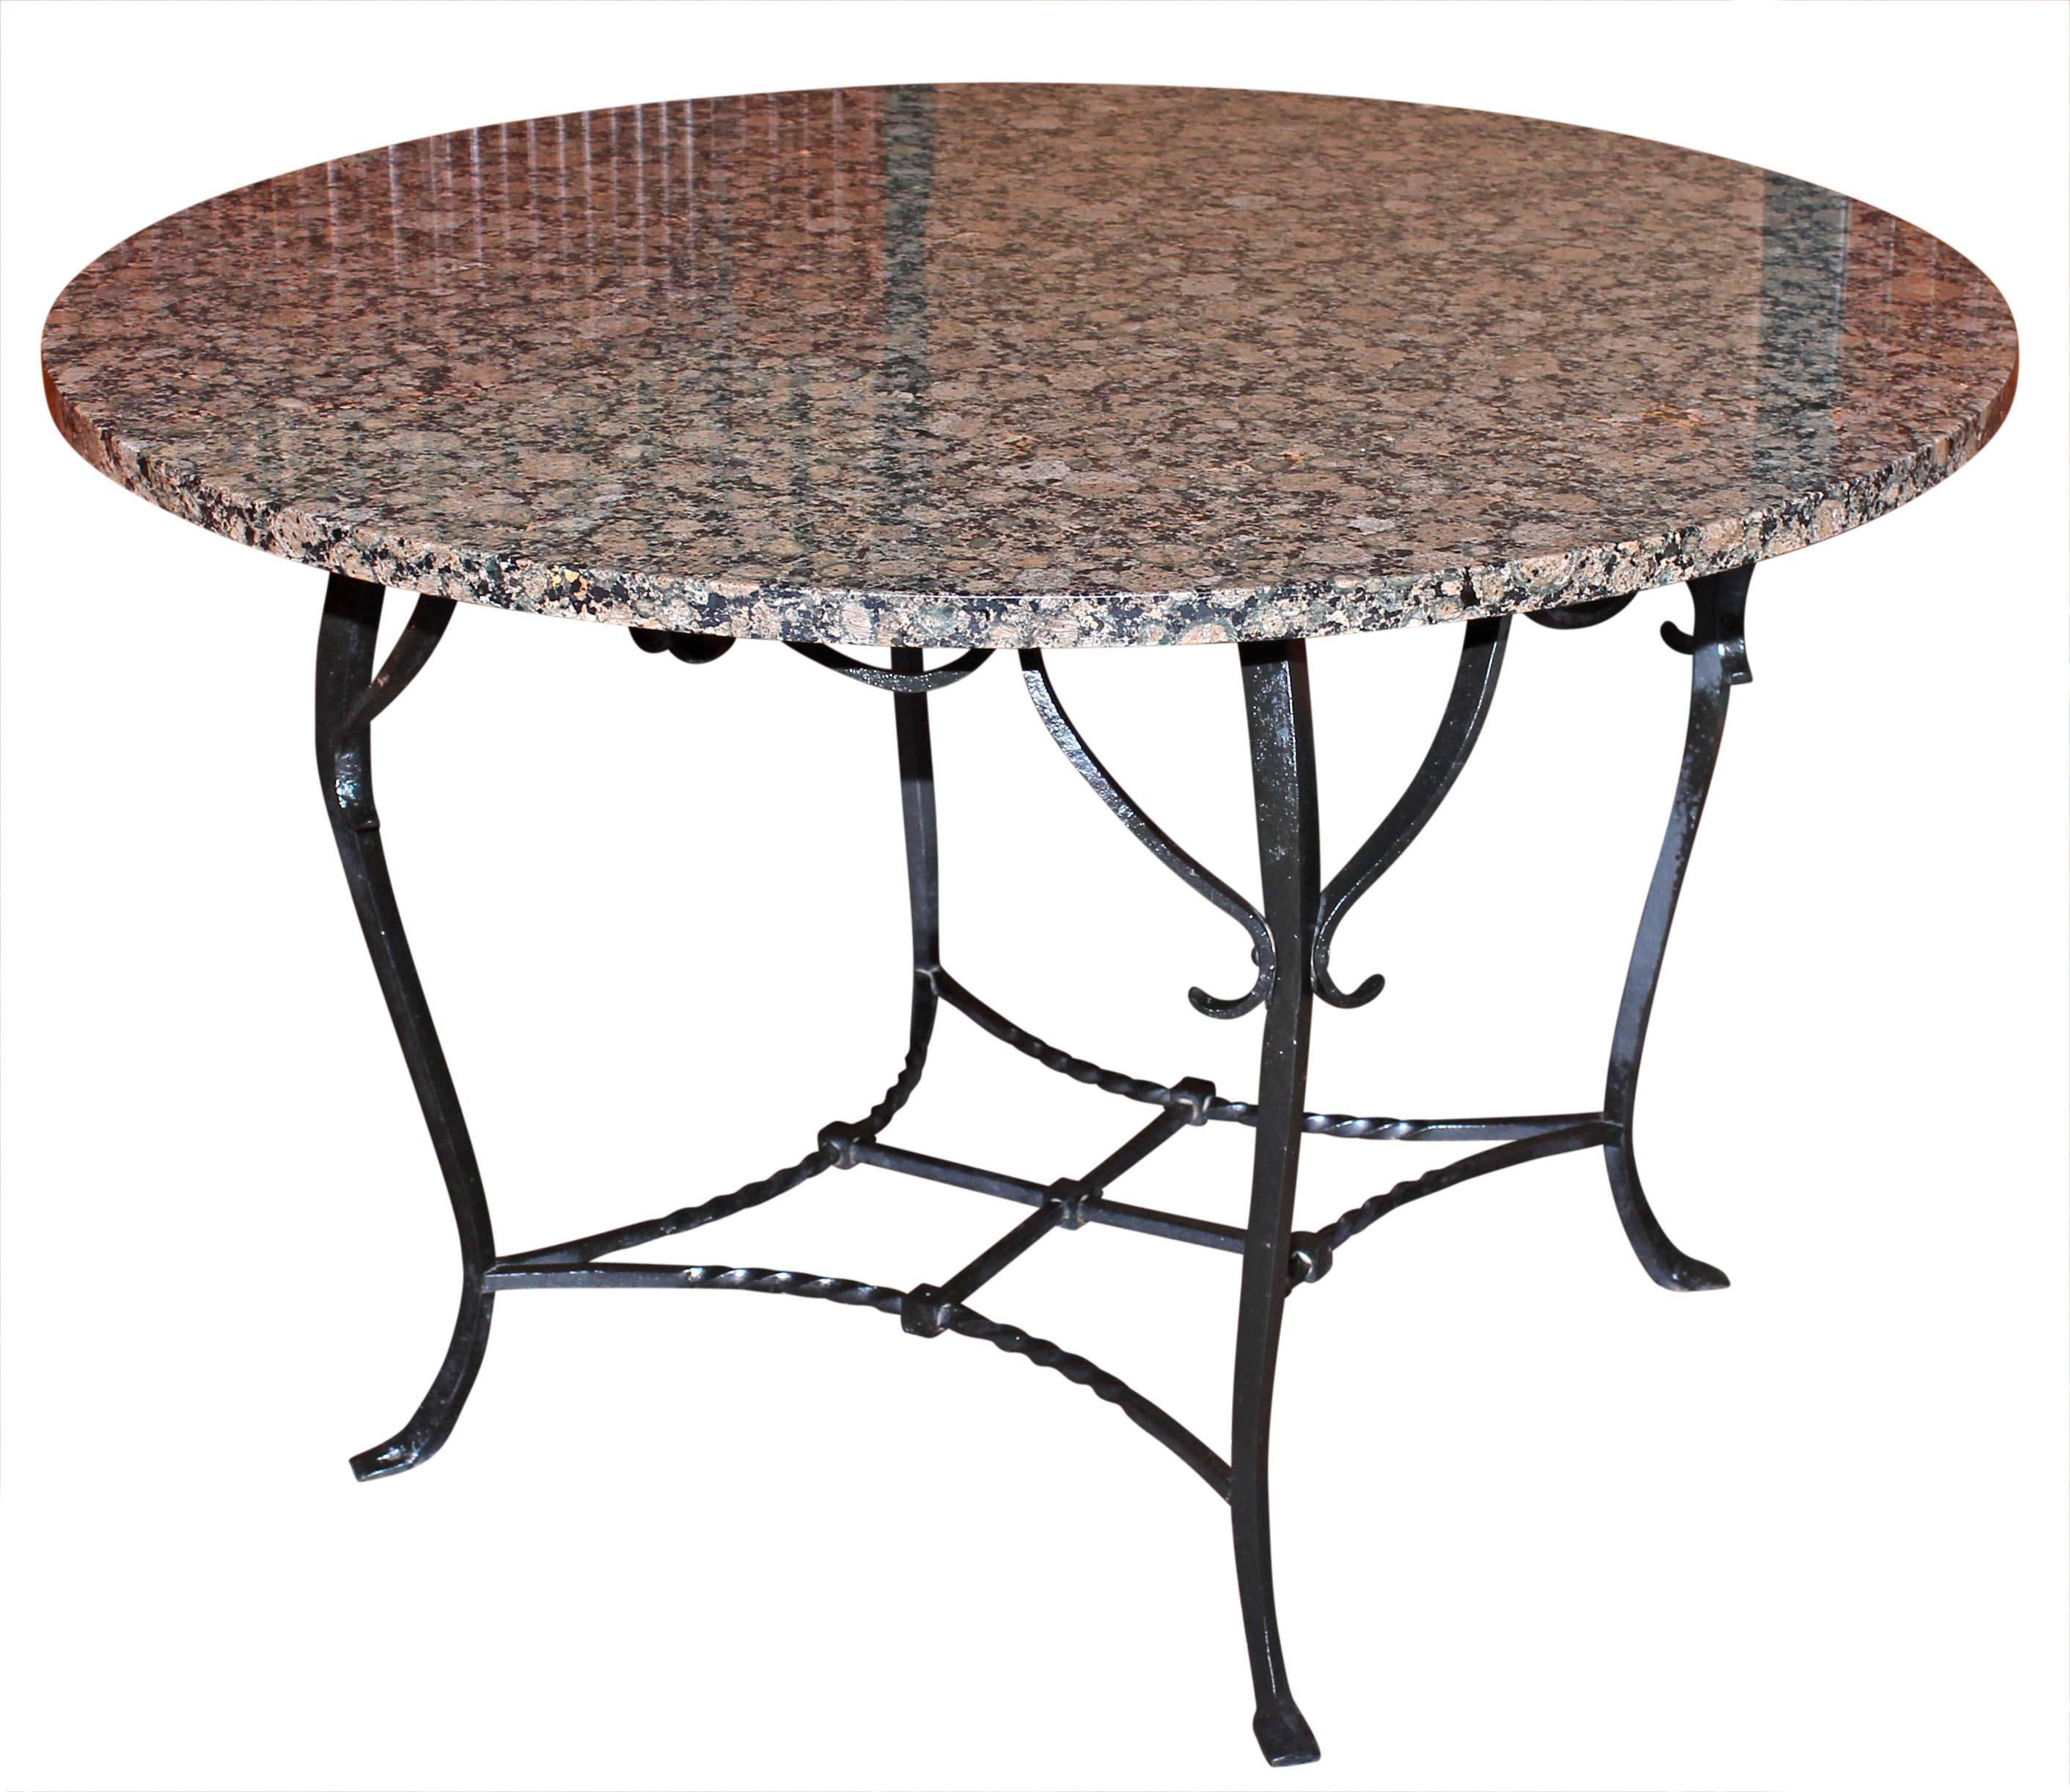 Antique wrought iron and granite dining table. Base is handmade. Table is strong and solidly built. Made circa 1910. Table may be used indoors or outdoors.